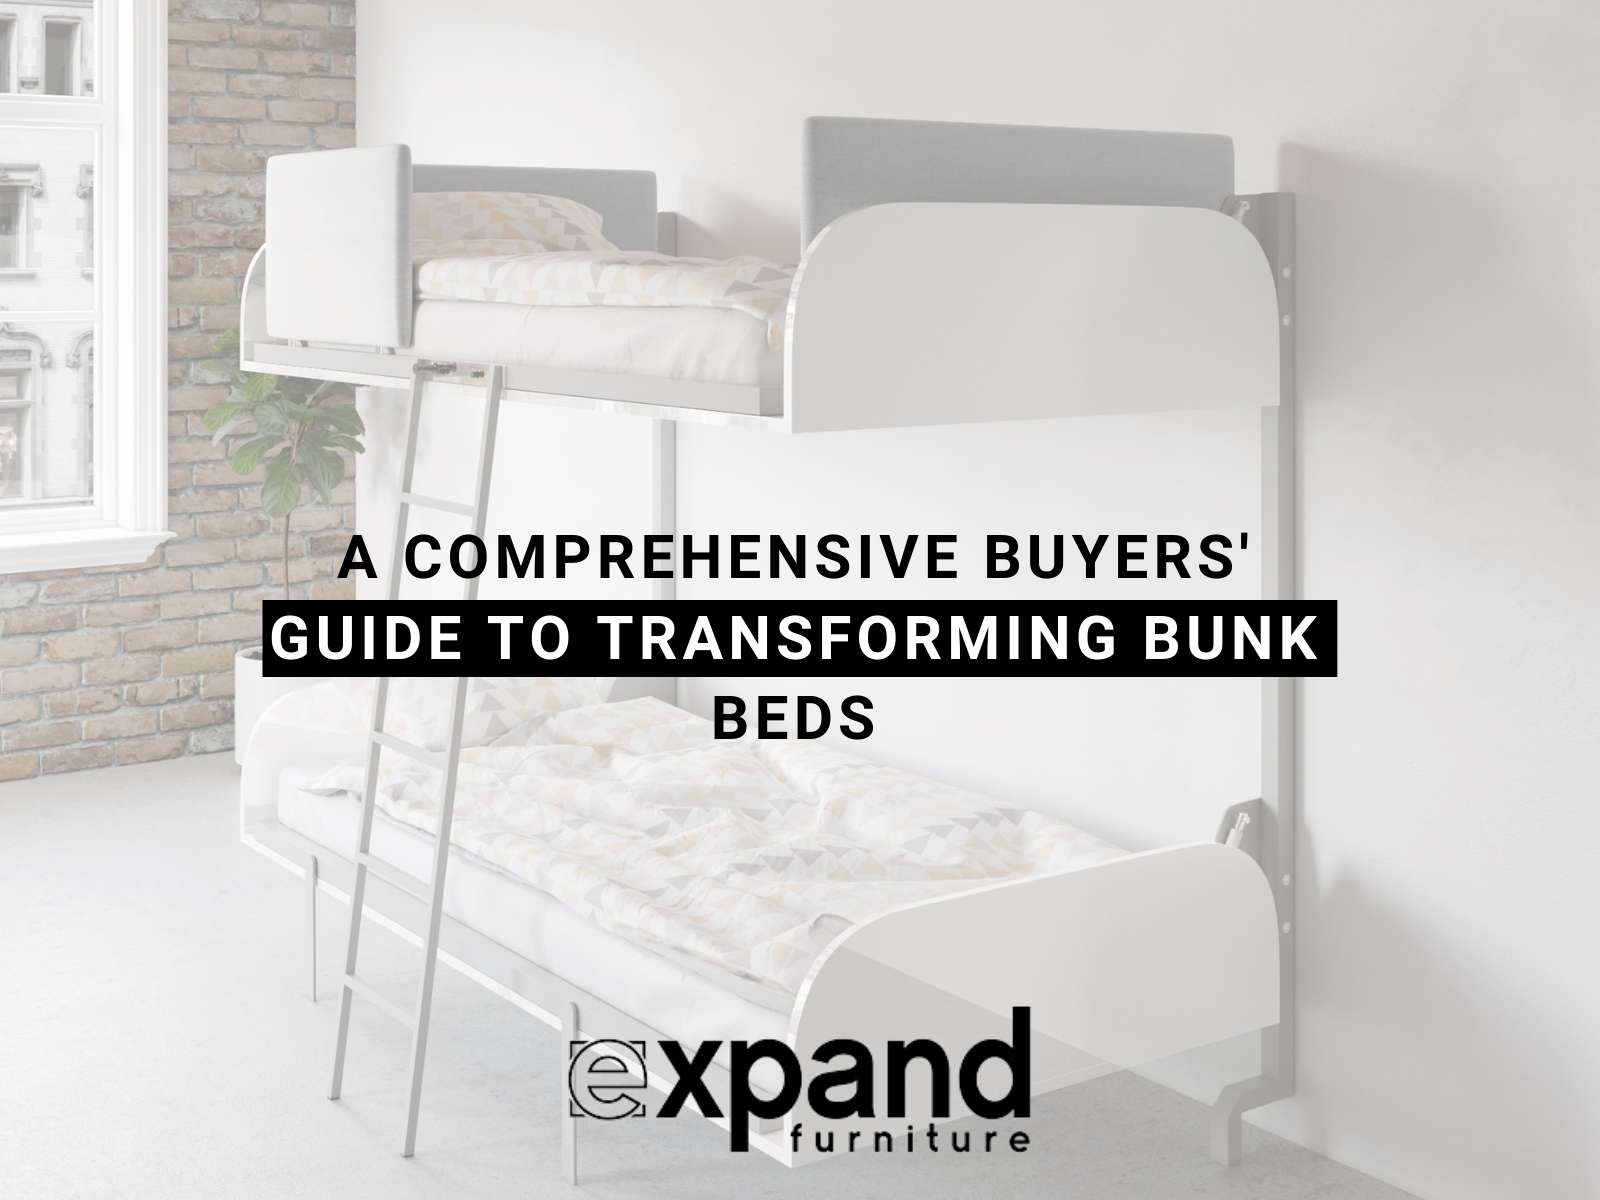 A Comprehensive Buyers' Guide to Transforming Bunk Beds